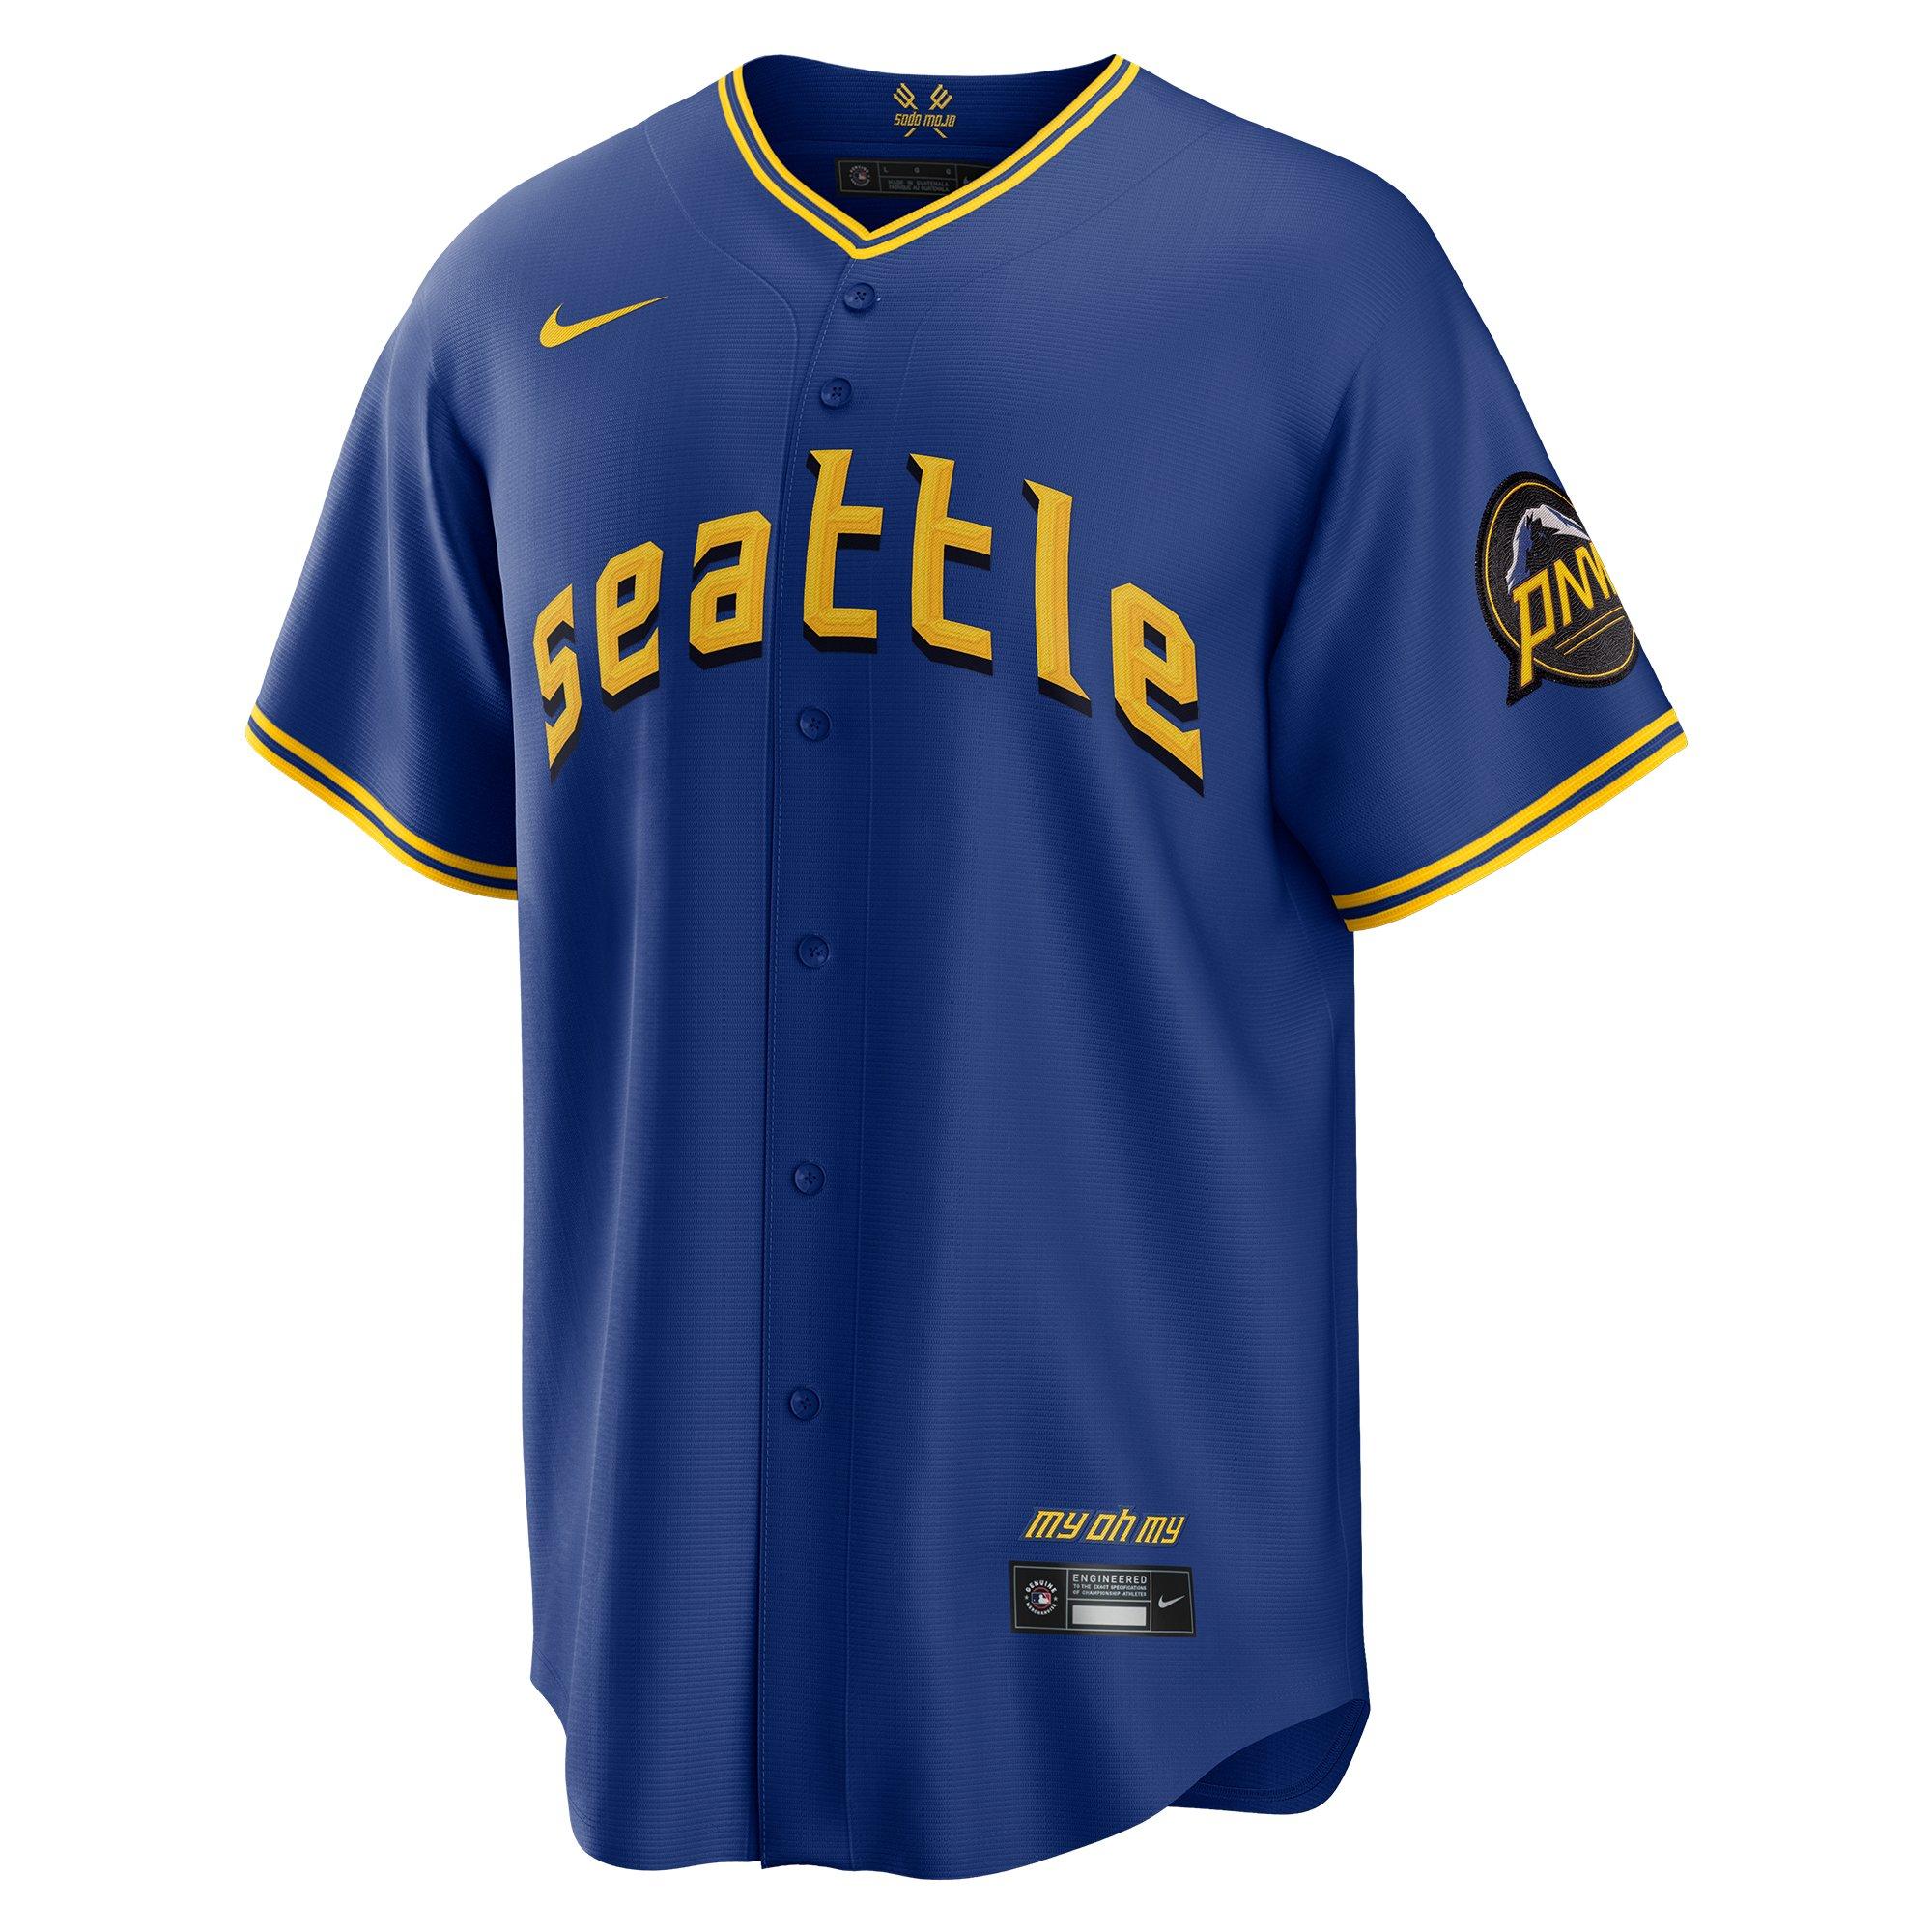 MLB® The Show™ - Seattle Mariners Nike City Connect Uniform makes a Splash  in MLB® The Show™ 23